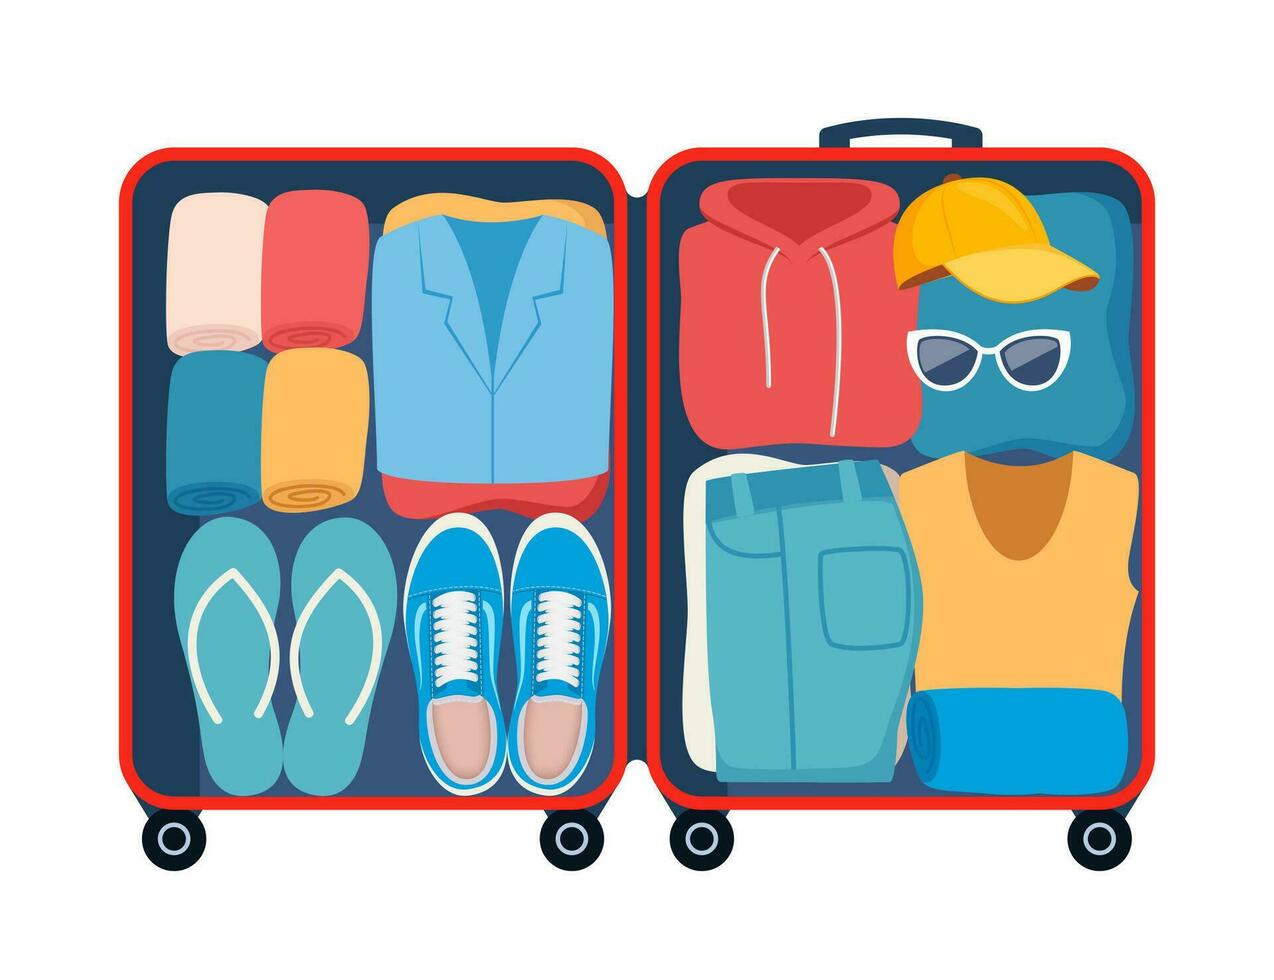 Suitcase with packed clothes for travel in top view. Clothing, footwear and accessories. Personal belongings in luggage, going on vacation, journey or business trip. Vector illustration.